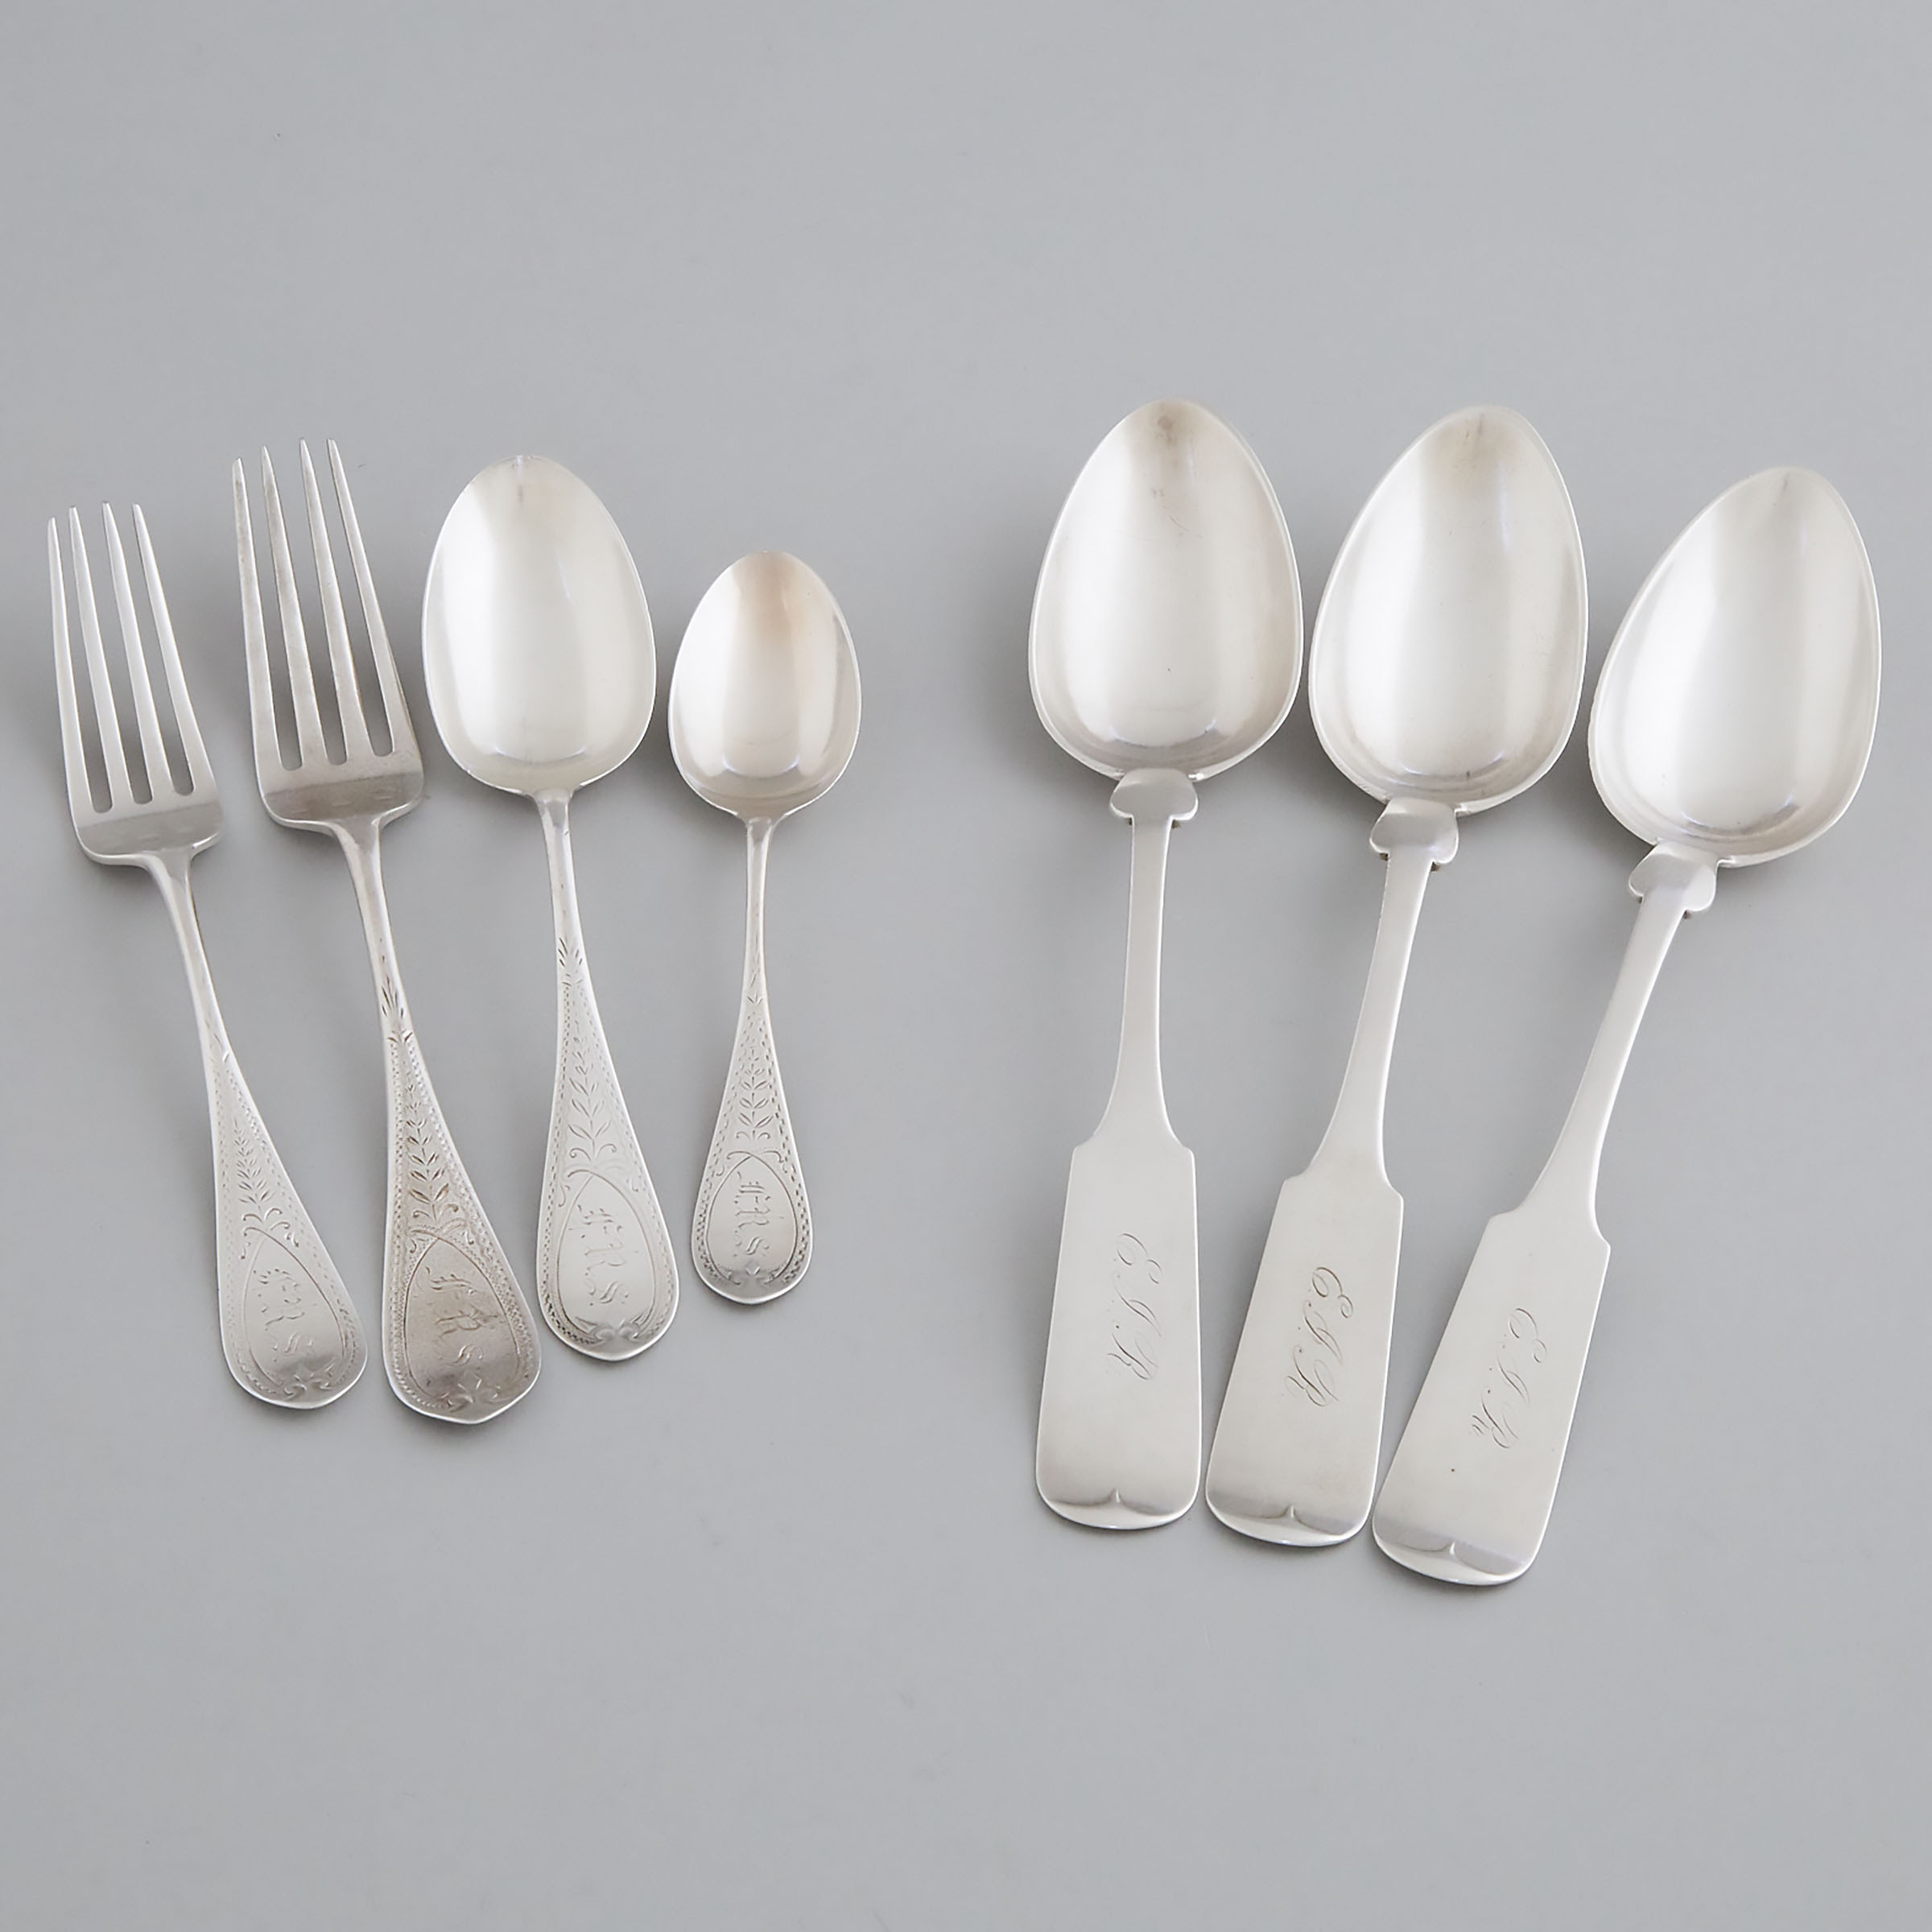 American Silver Flatware, Whiting Mfg. Co., New York, N.Y., late 19th century